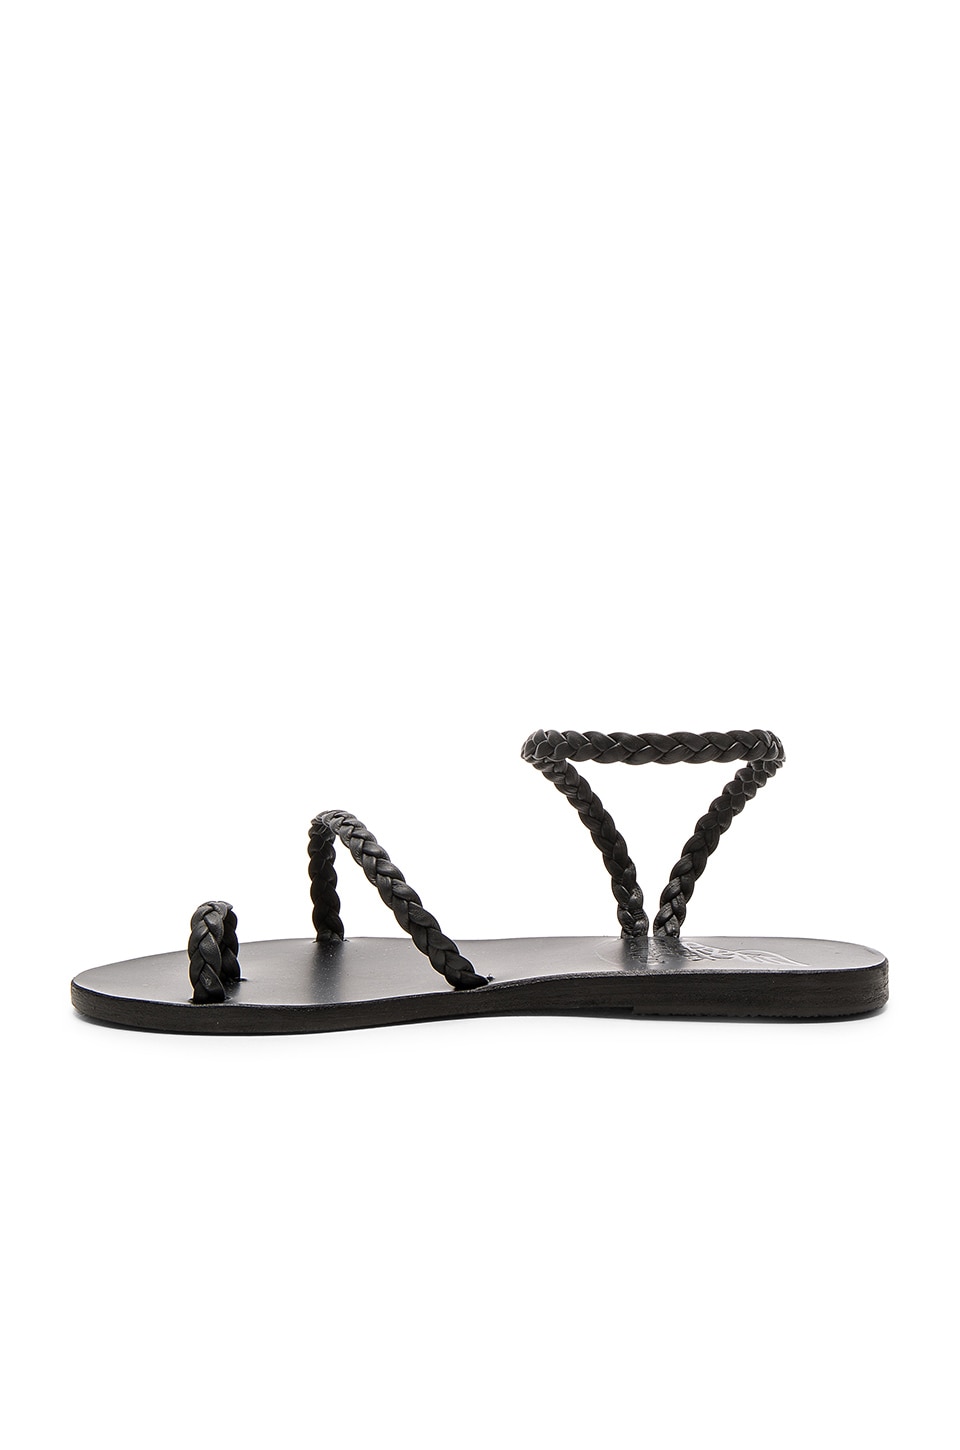 3 Stores: ANCIENT GREEK SANDALS Eleftheria Braided Leather Sandals ...